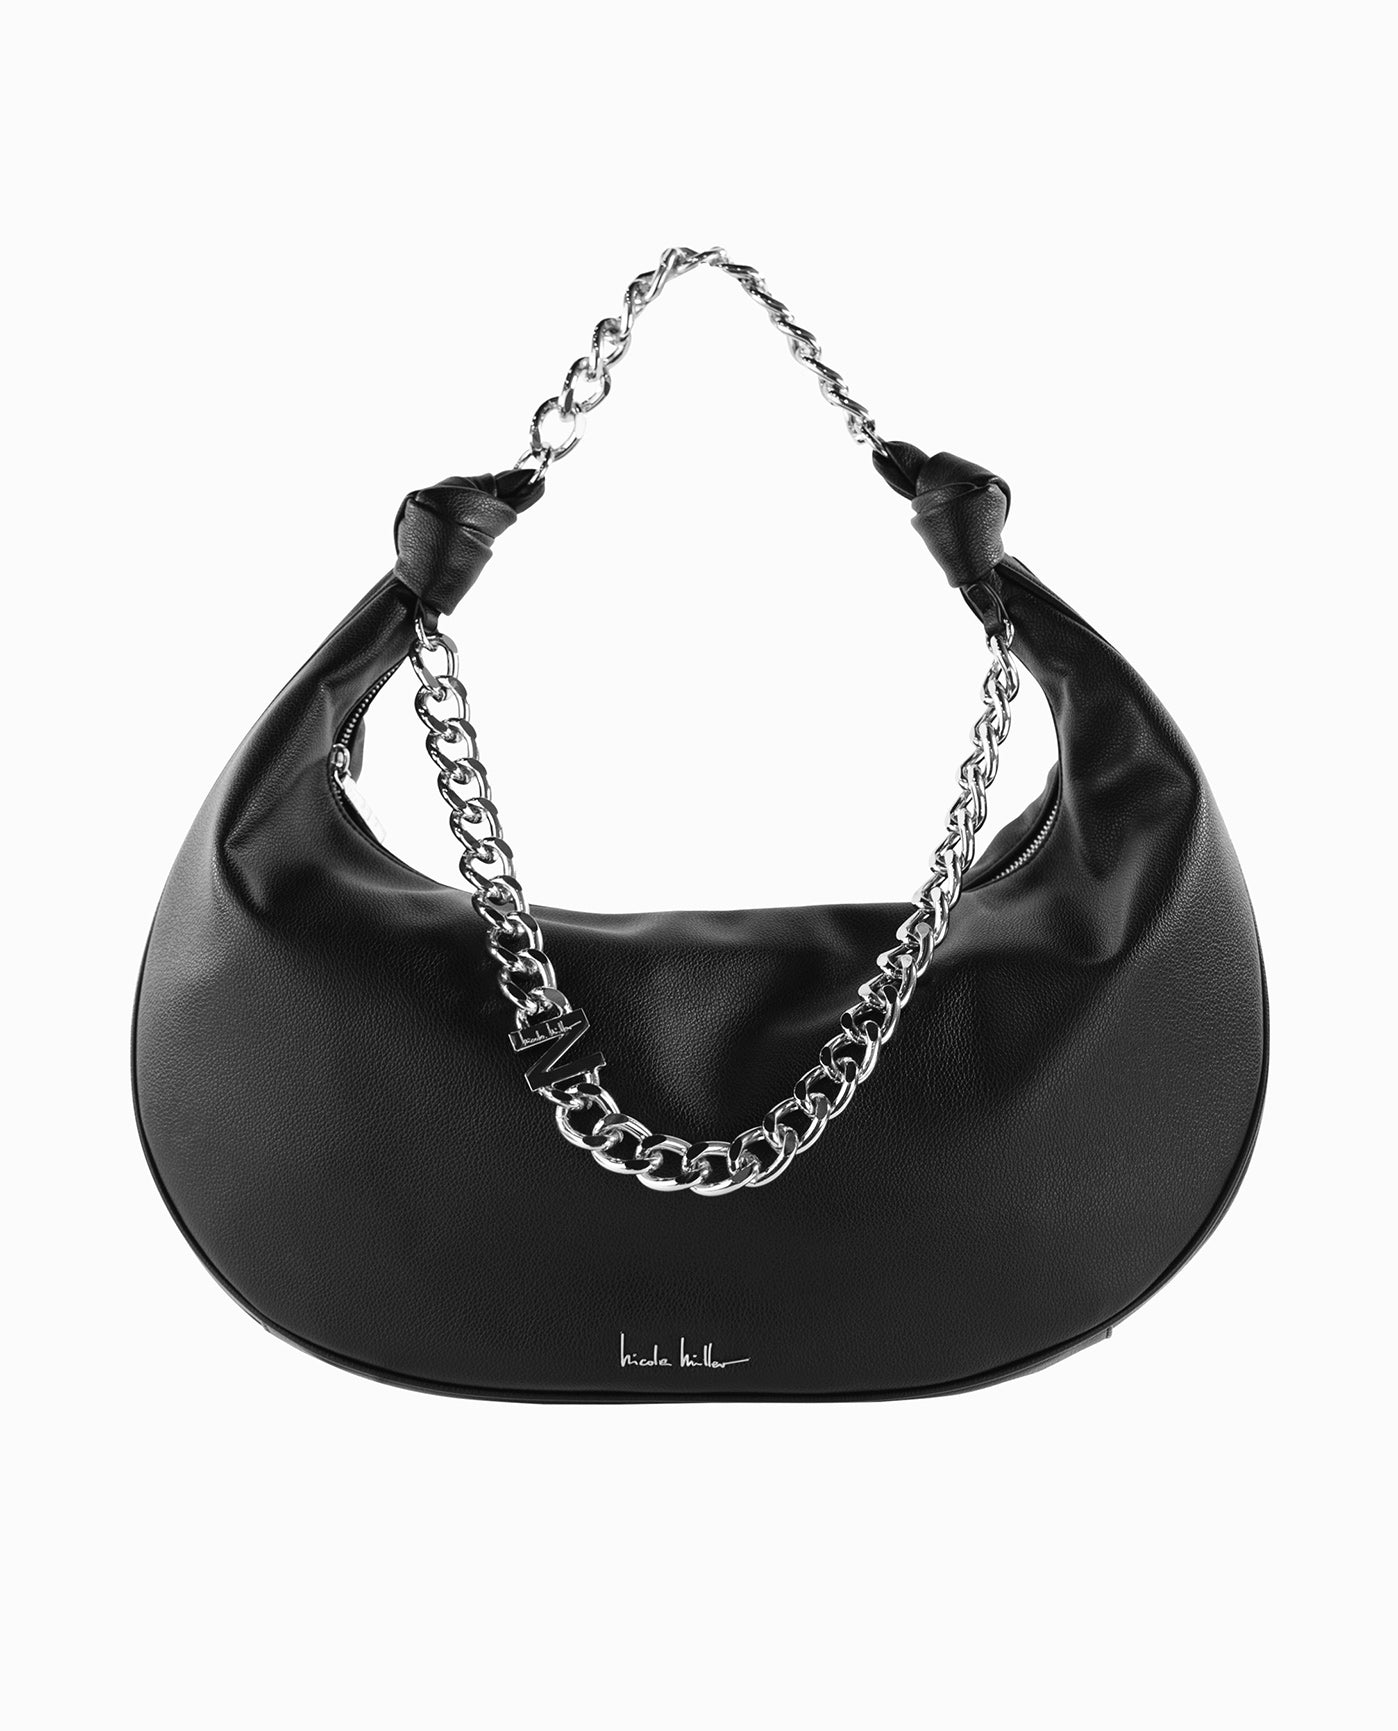 Black Hobo Style Handbag with a Silver Chain, "N" charm and Knot Details | Black Beauty And Silver